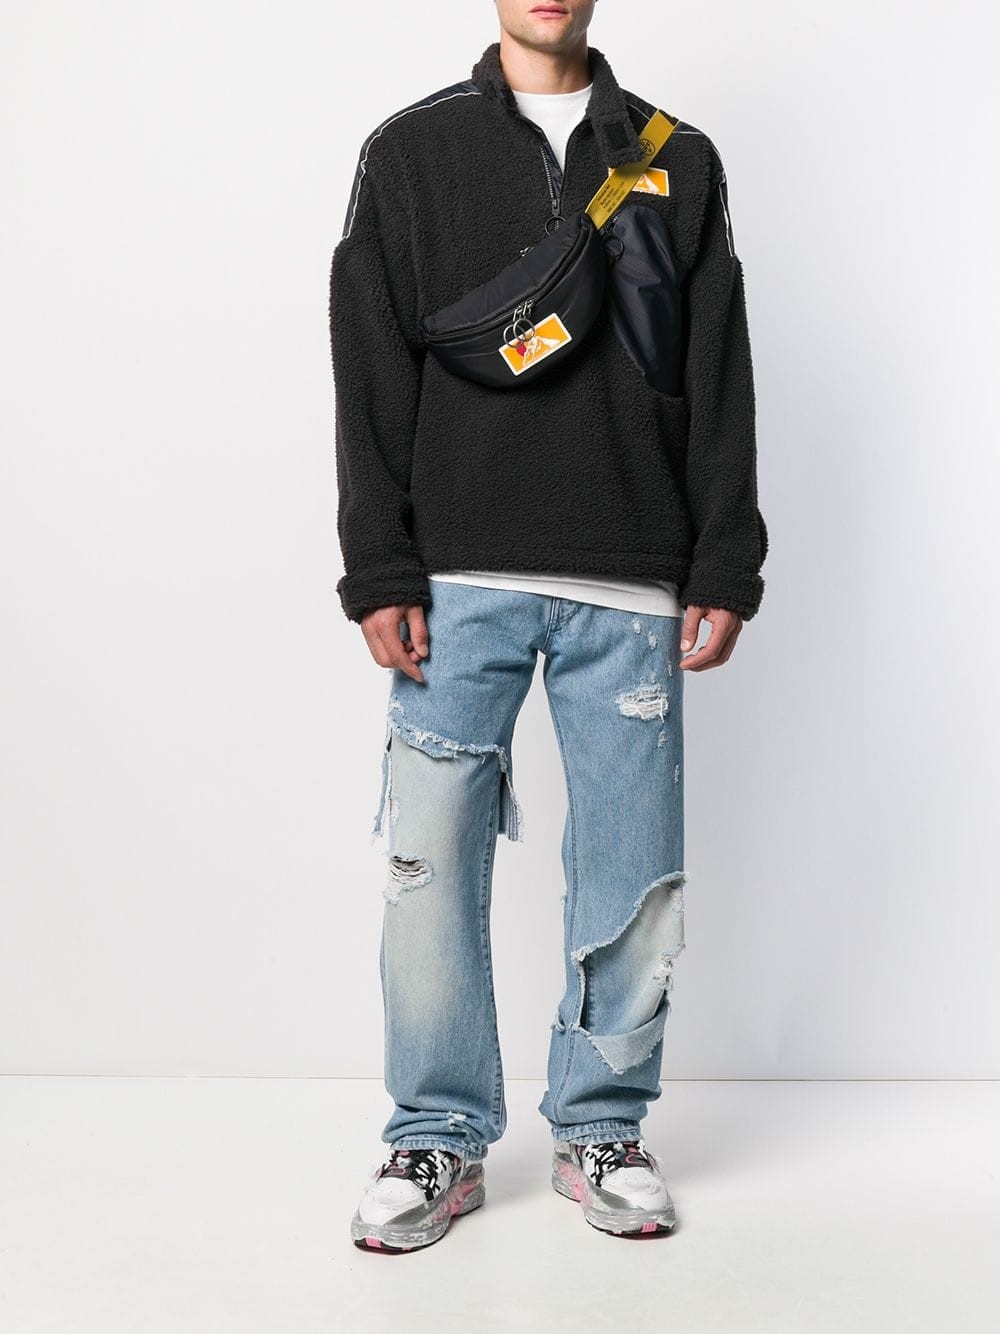 off-white PUFFY BASIC BELT BAG available on montiboutique.com - 31219